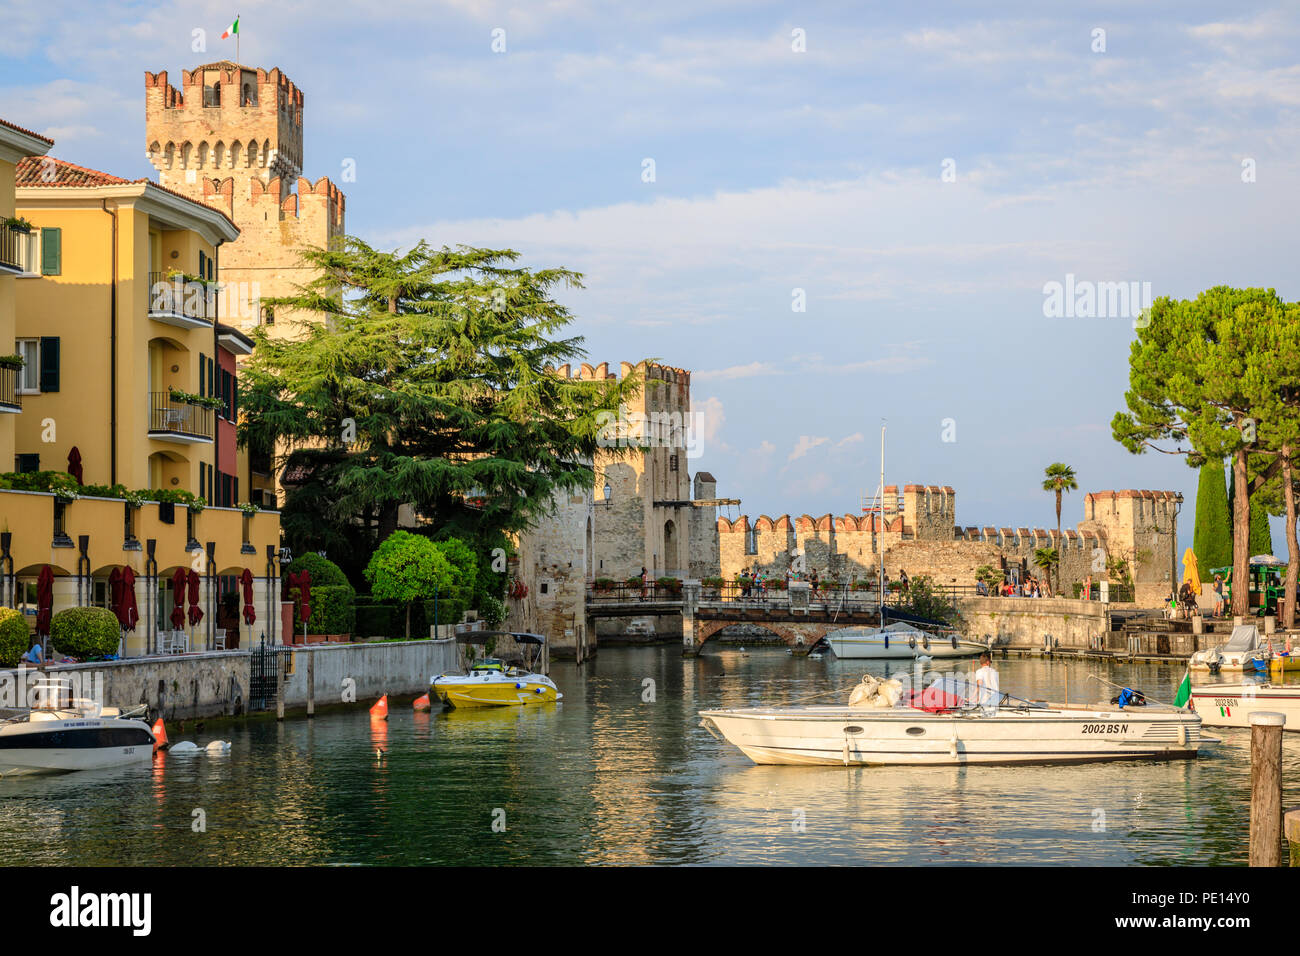 The historic spa town of Sirmione is one of the most picturesque on Lake Garda.  The old fort or Castello is surrounded by water Stock Photo